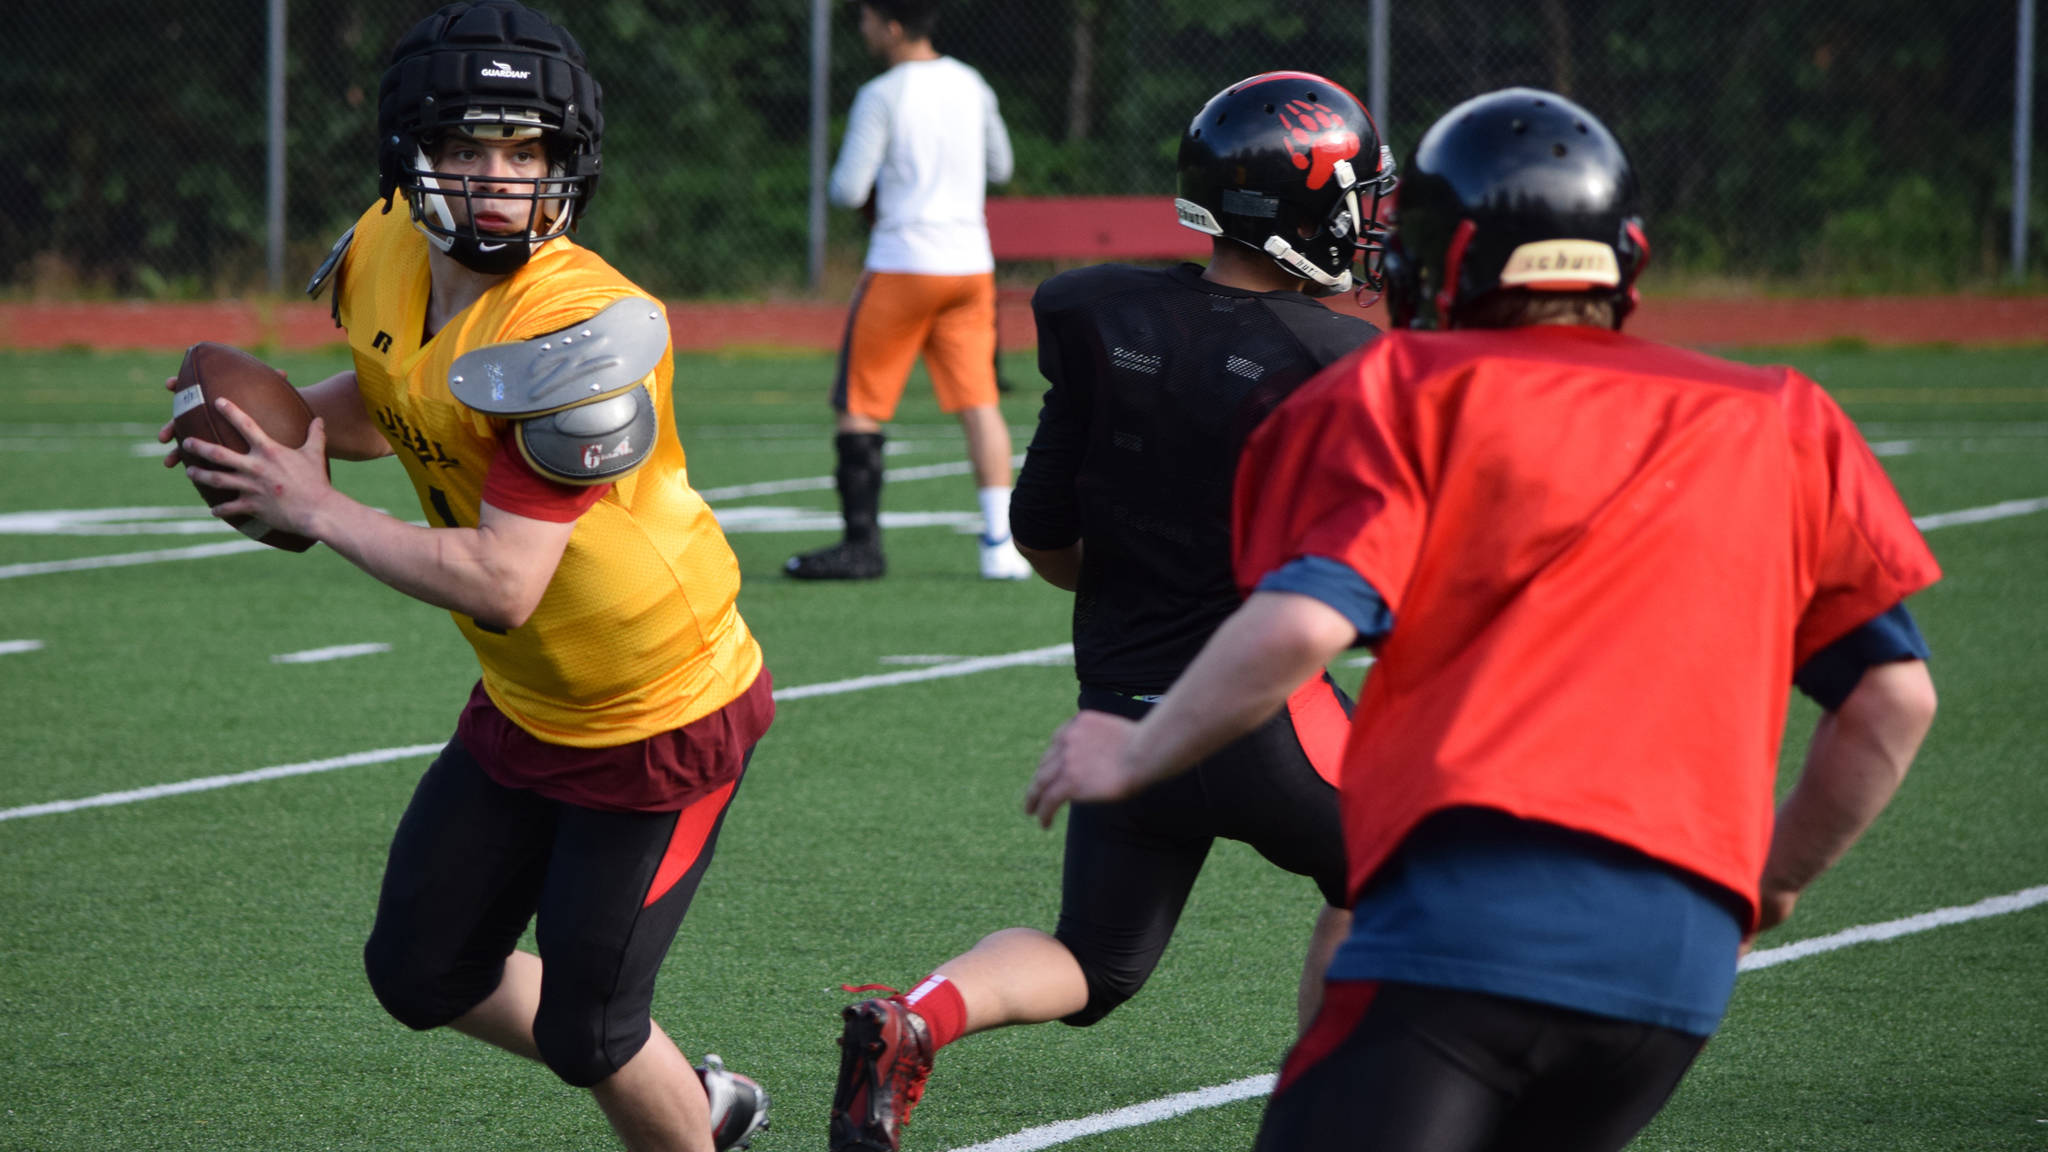 Quarterback Bubba Stults rolls out of the pocket during Juneau-Douglas High School football practice on Tuesday, July 1. (Nolin Ainsworth | Juneau Empire)